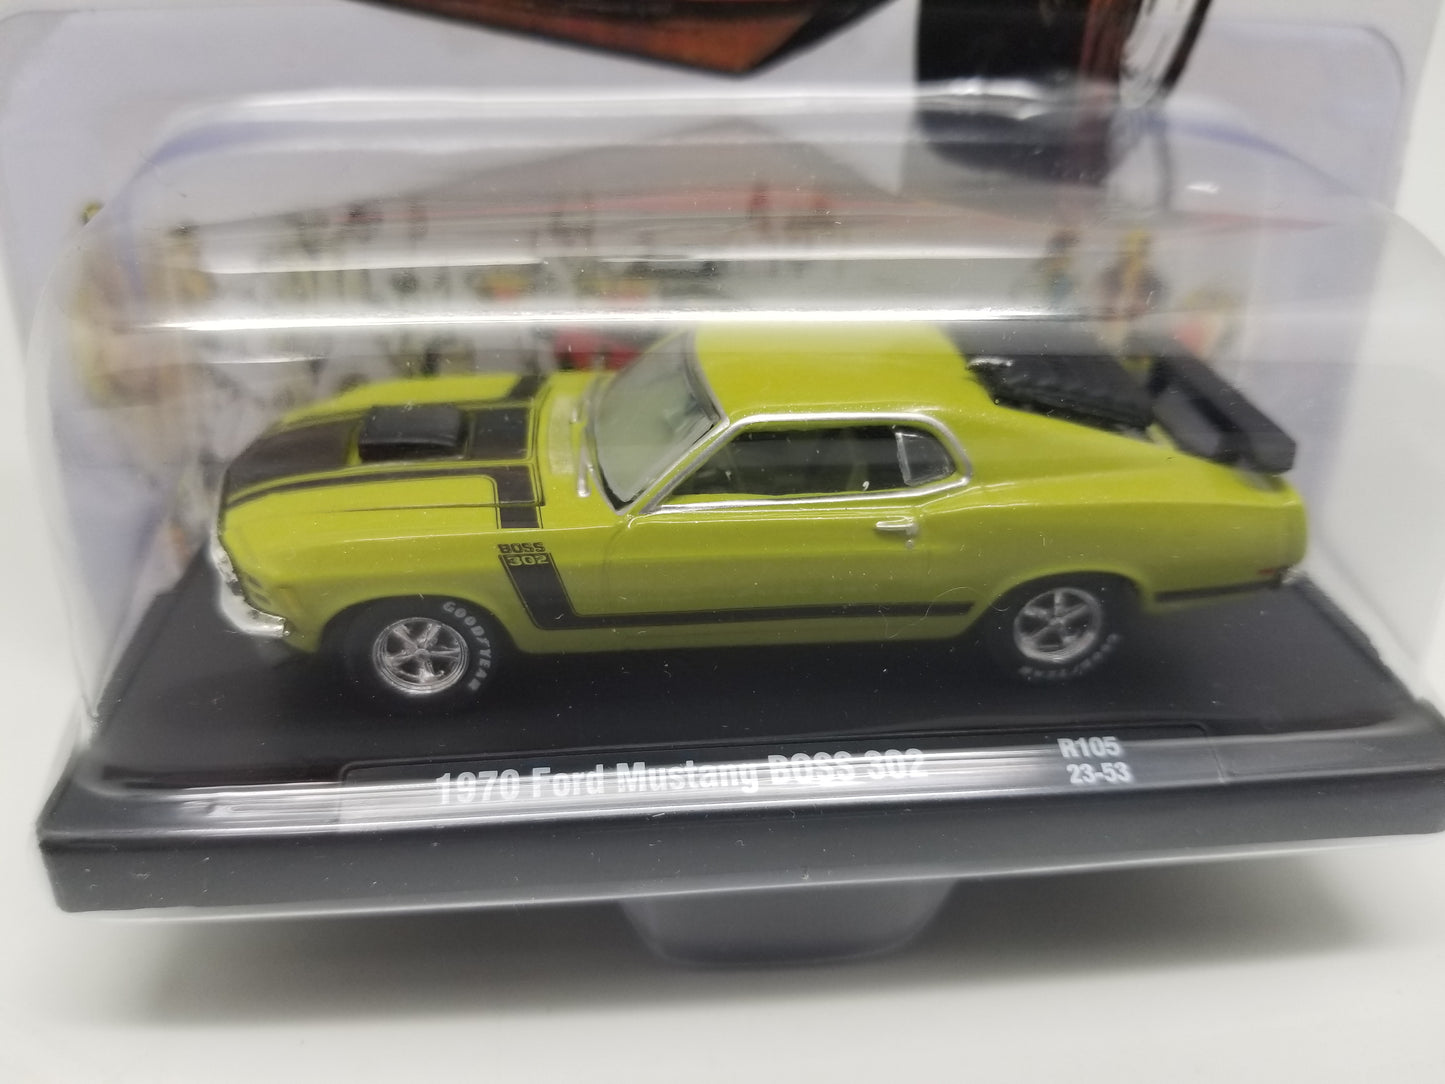 M2 1970 Ford Mustang BOSS 302